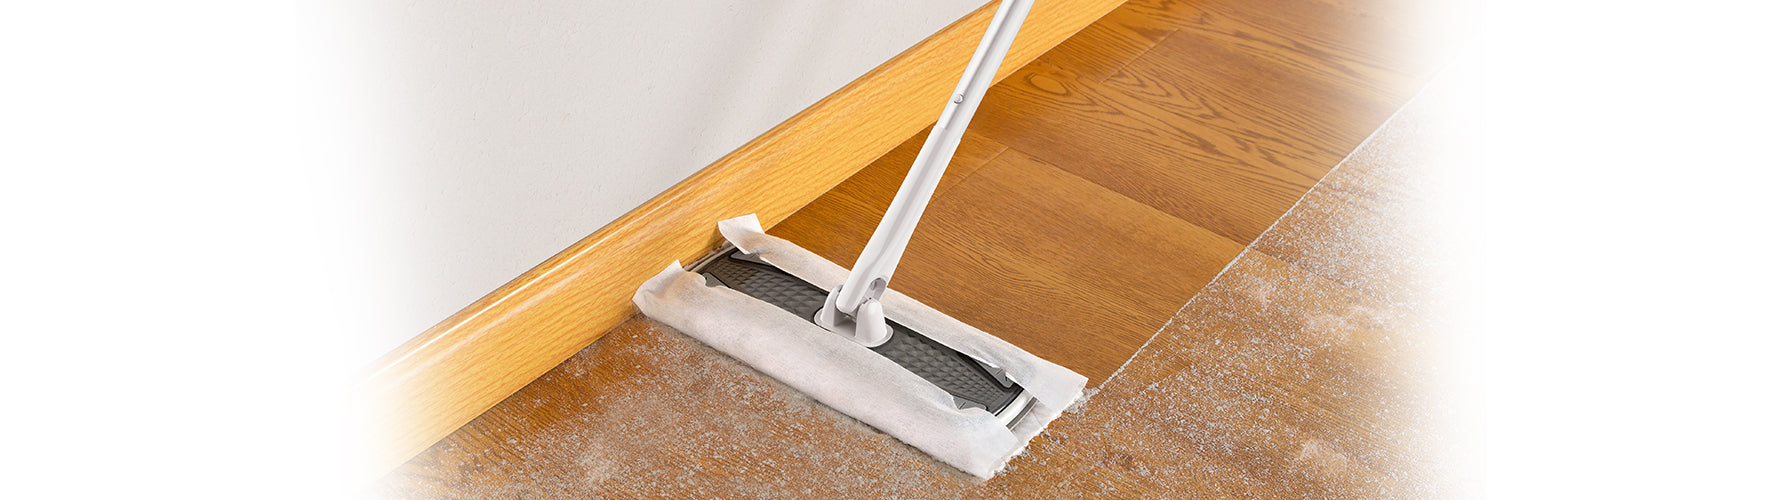 The Best Super House Cleaning Good Hardwood Floor Dust Mop - China Mop and House  Cleaning Mop price